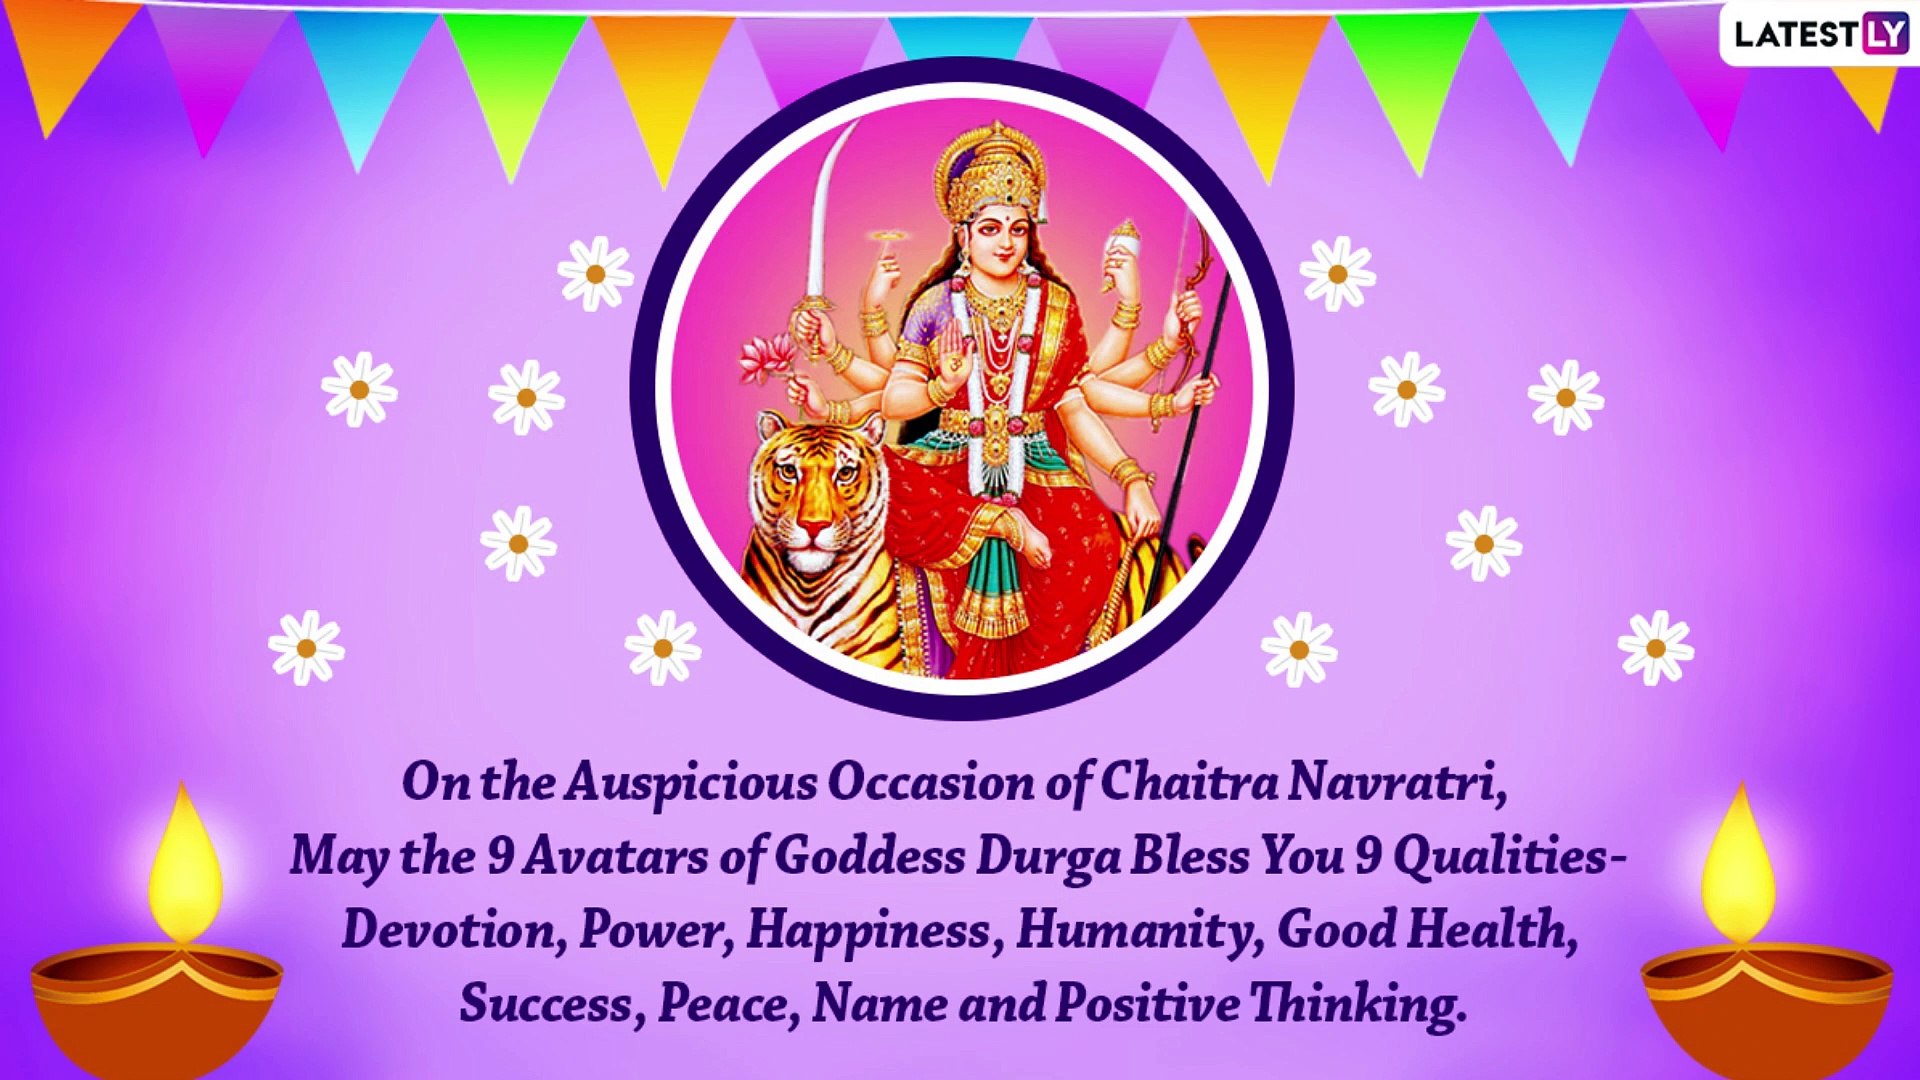 Happy Chaitra Navratri 2022 Greetings: Wishes, Navdurga Images & Messages  for the Nine Day Festival - video Dailymotion